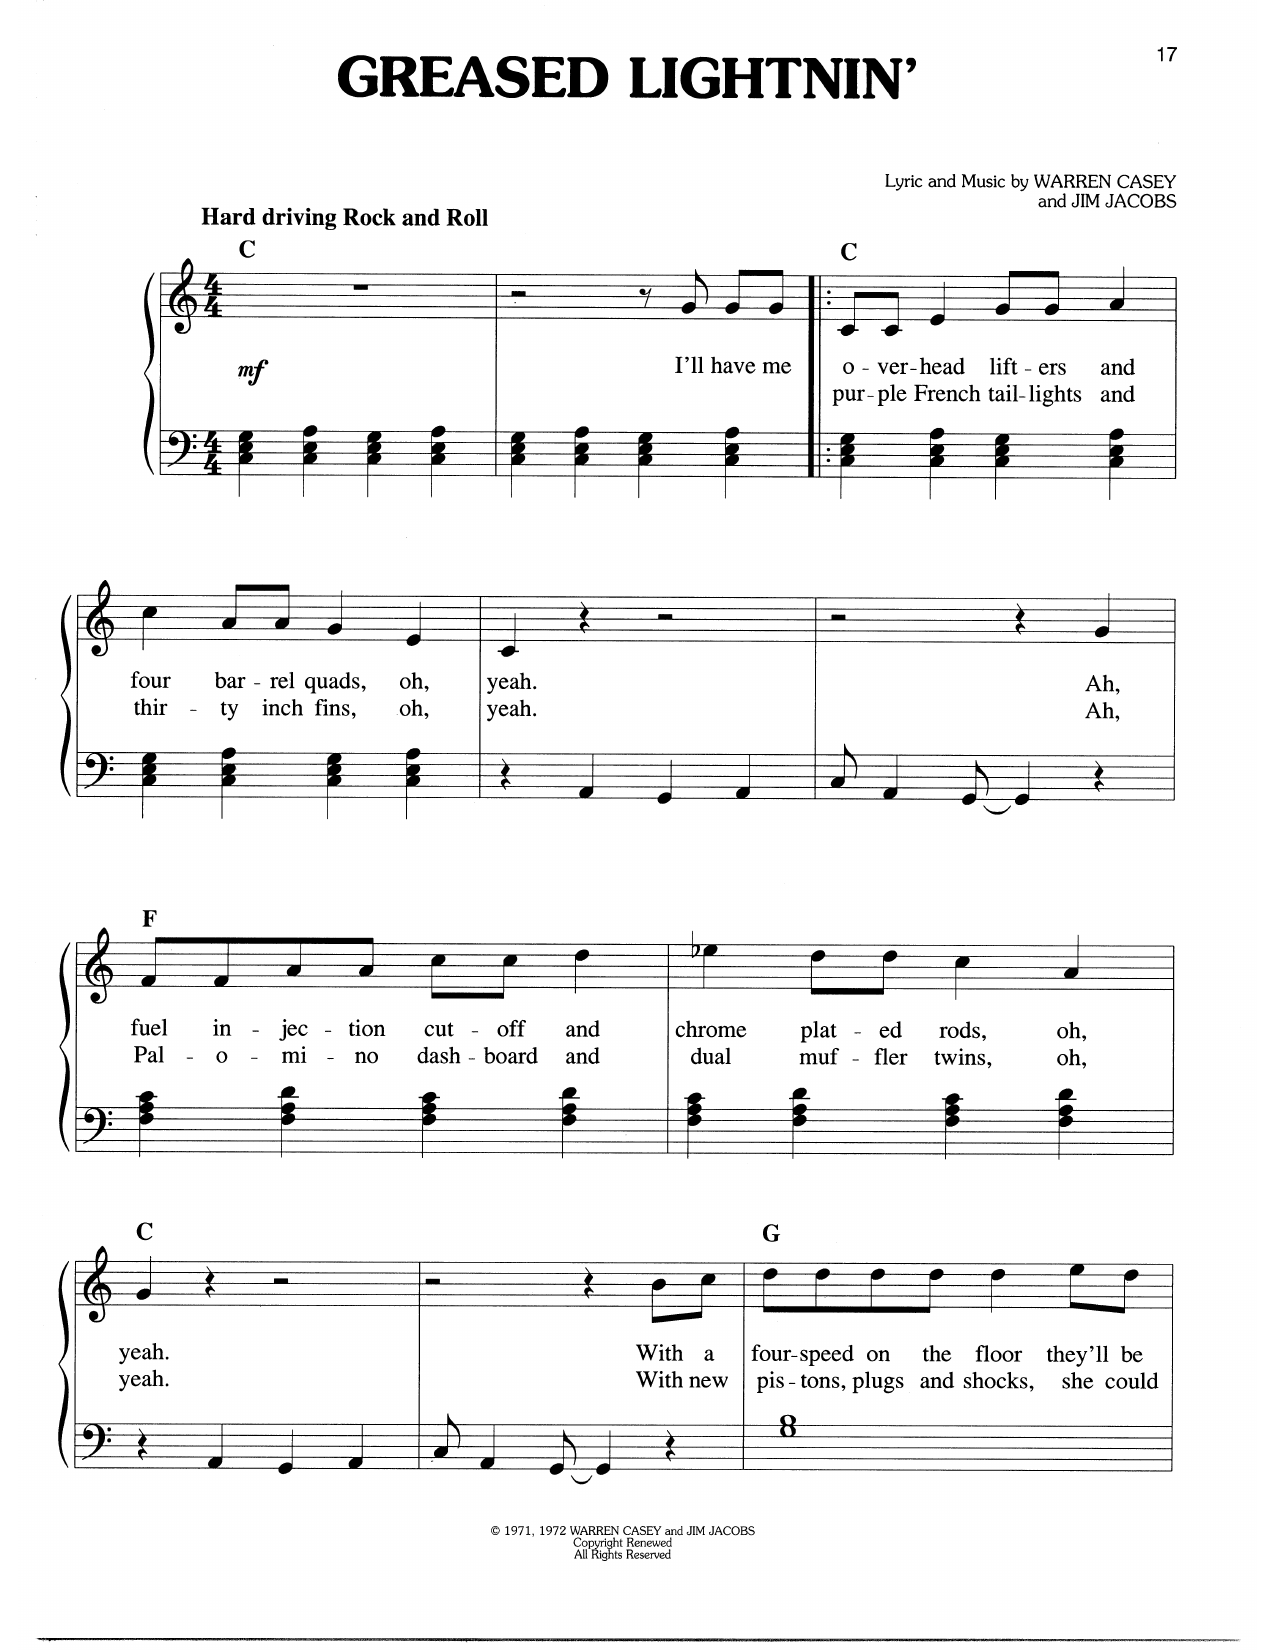 Download Warren Casey & Jim Jacobs Greased Lightnin' (from Grease) Sheet Music